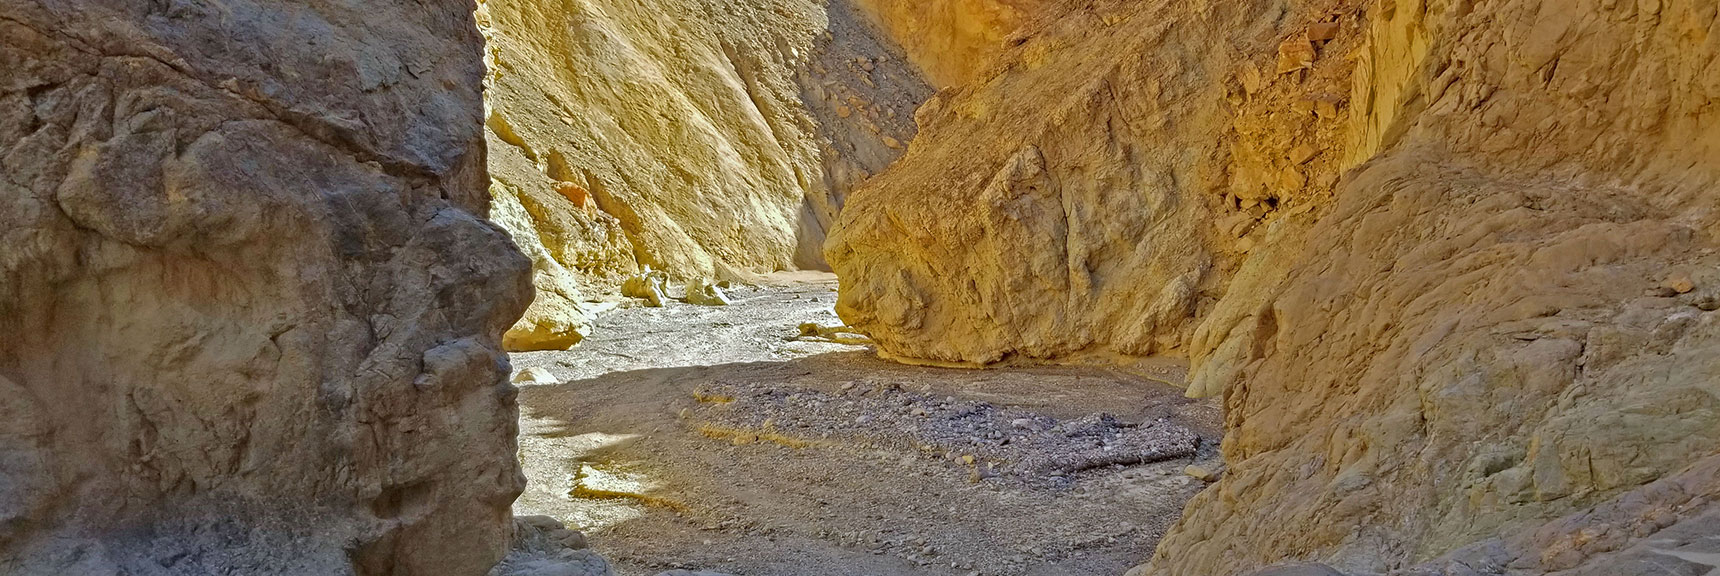 Gower Gulch Widens Just Before Opening Out Into Death Valley. | Golden Canyon to Zabriskie Point | Death Valley National Park, California